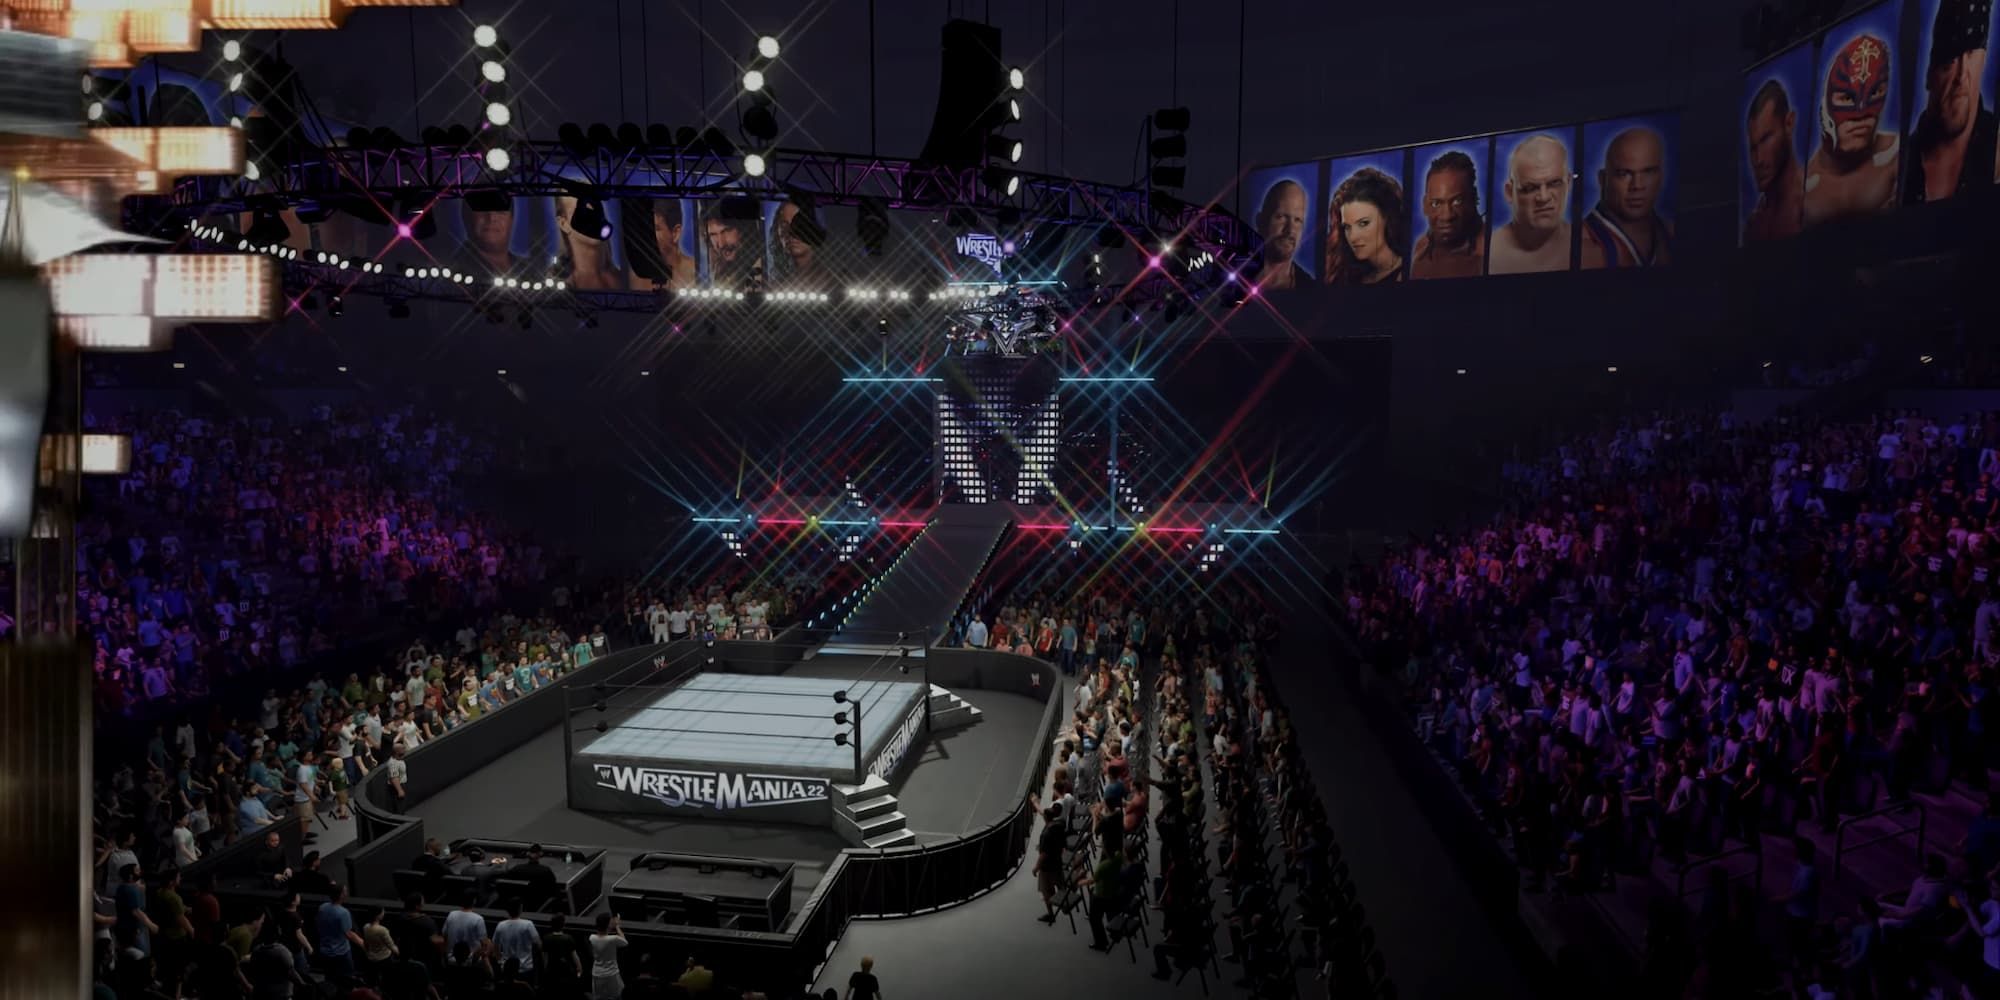 The WrestleMania 22 arena in WWE 2K23 showcases several superstars on banners hanging above the audiendce.